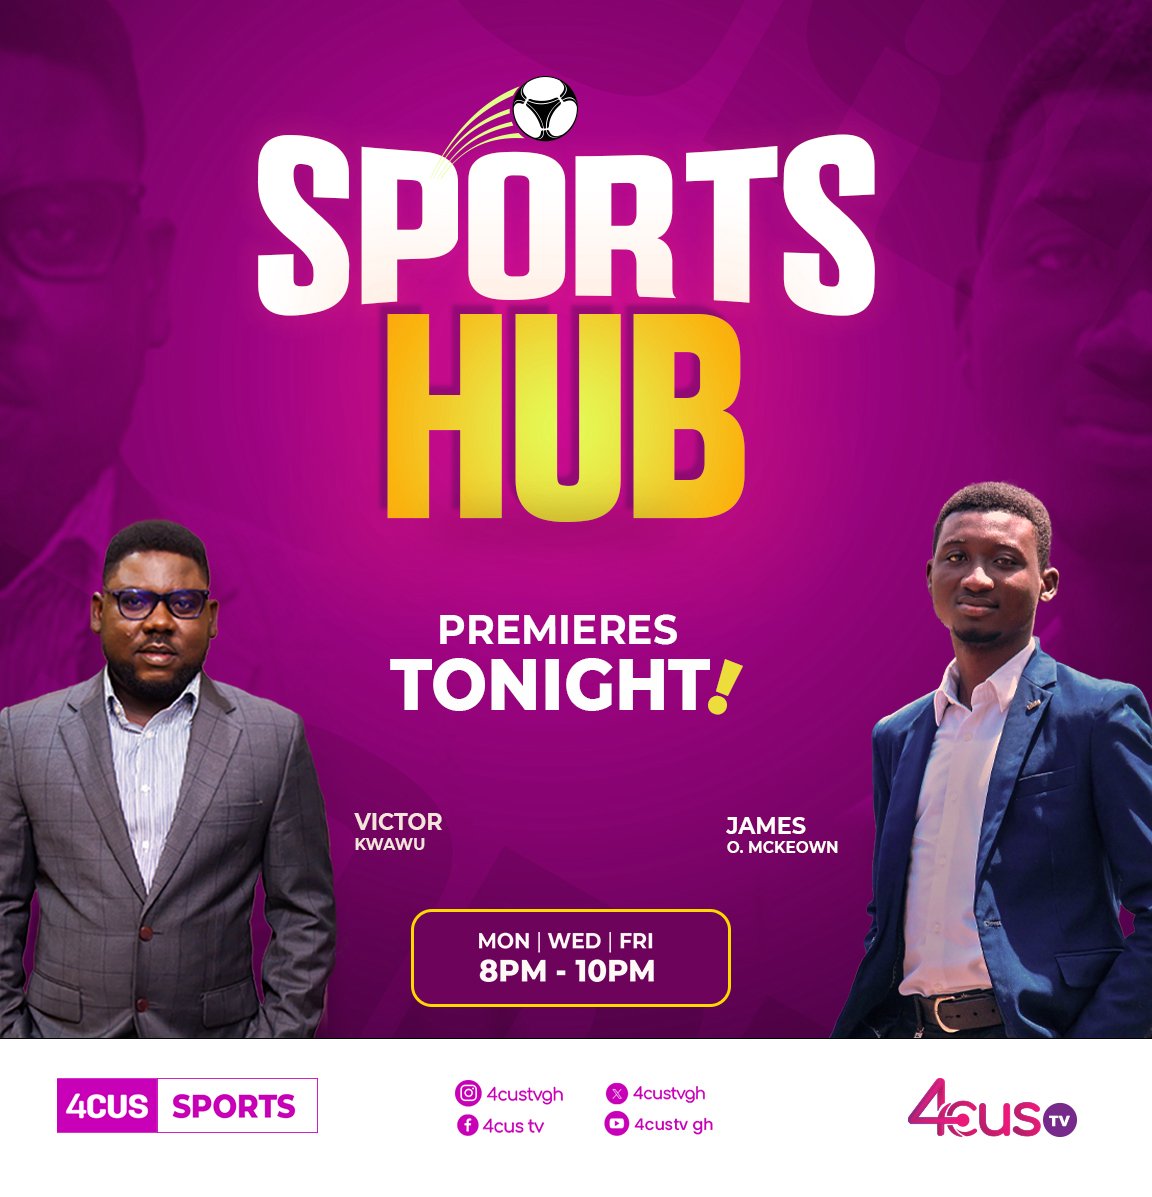 The much awaited sports show premieres tonight on your number one TV channel with @victor_kwawu and @OhenbaJames 

#4cusTV
#4cusSports